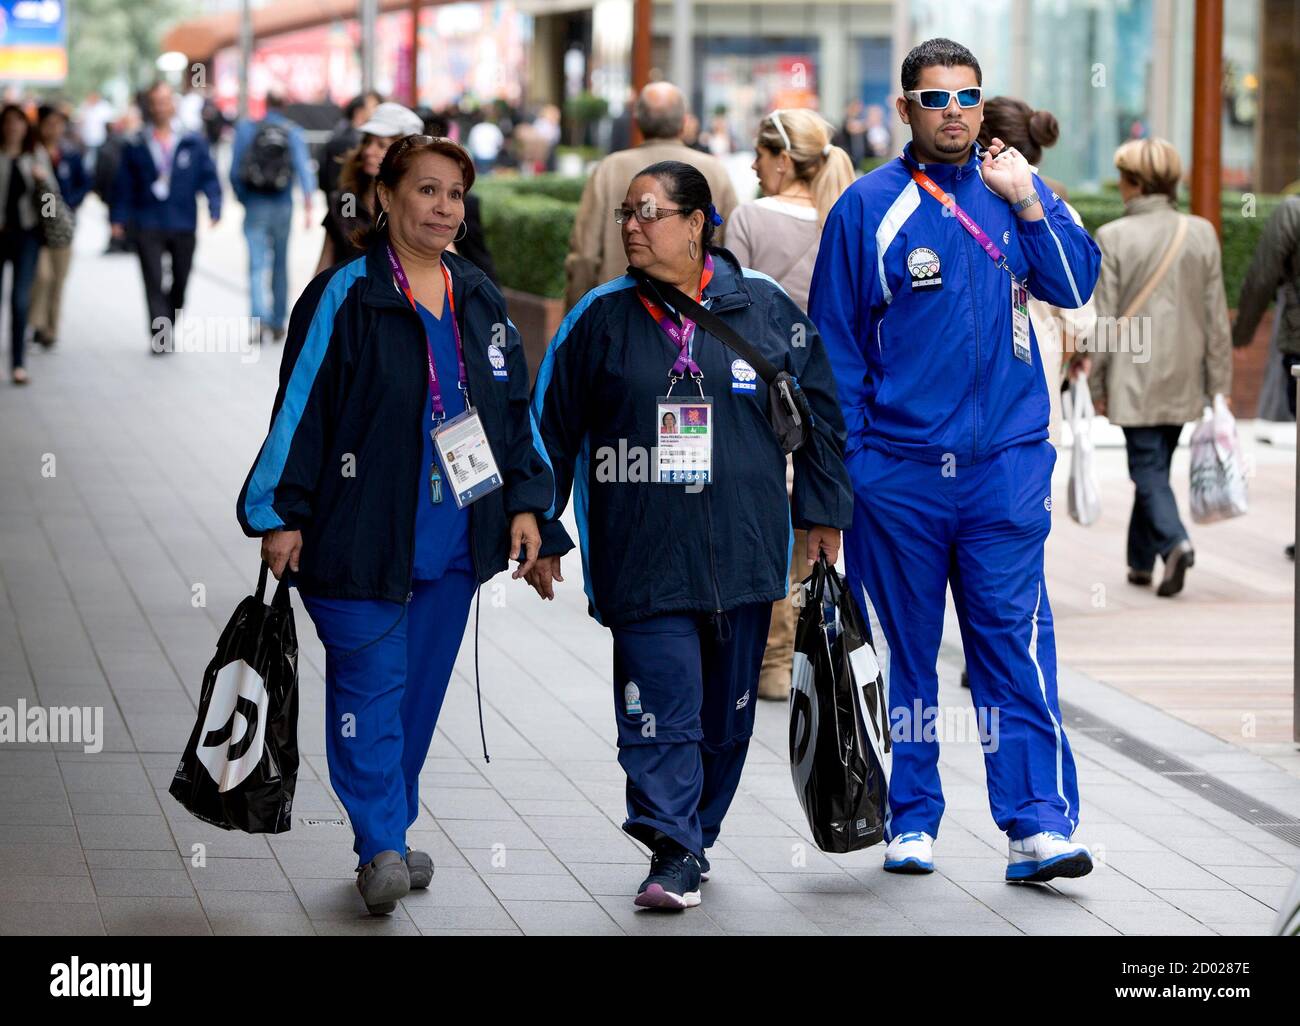 Members of the Honduras Olympic Team walk in the Westfield Shopping Centre, a major gateway for visitors to the London 2012 Olympic Park, in Stratford, east London, July 19, 2012. REUTERS/Neil Hall (BRITAIN - Tags: SPORT OLYMPICS) Stock Photo